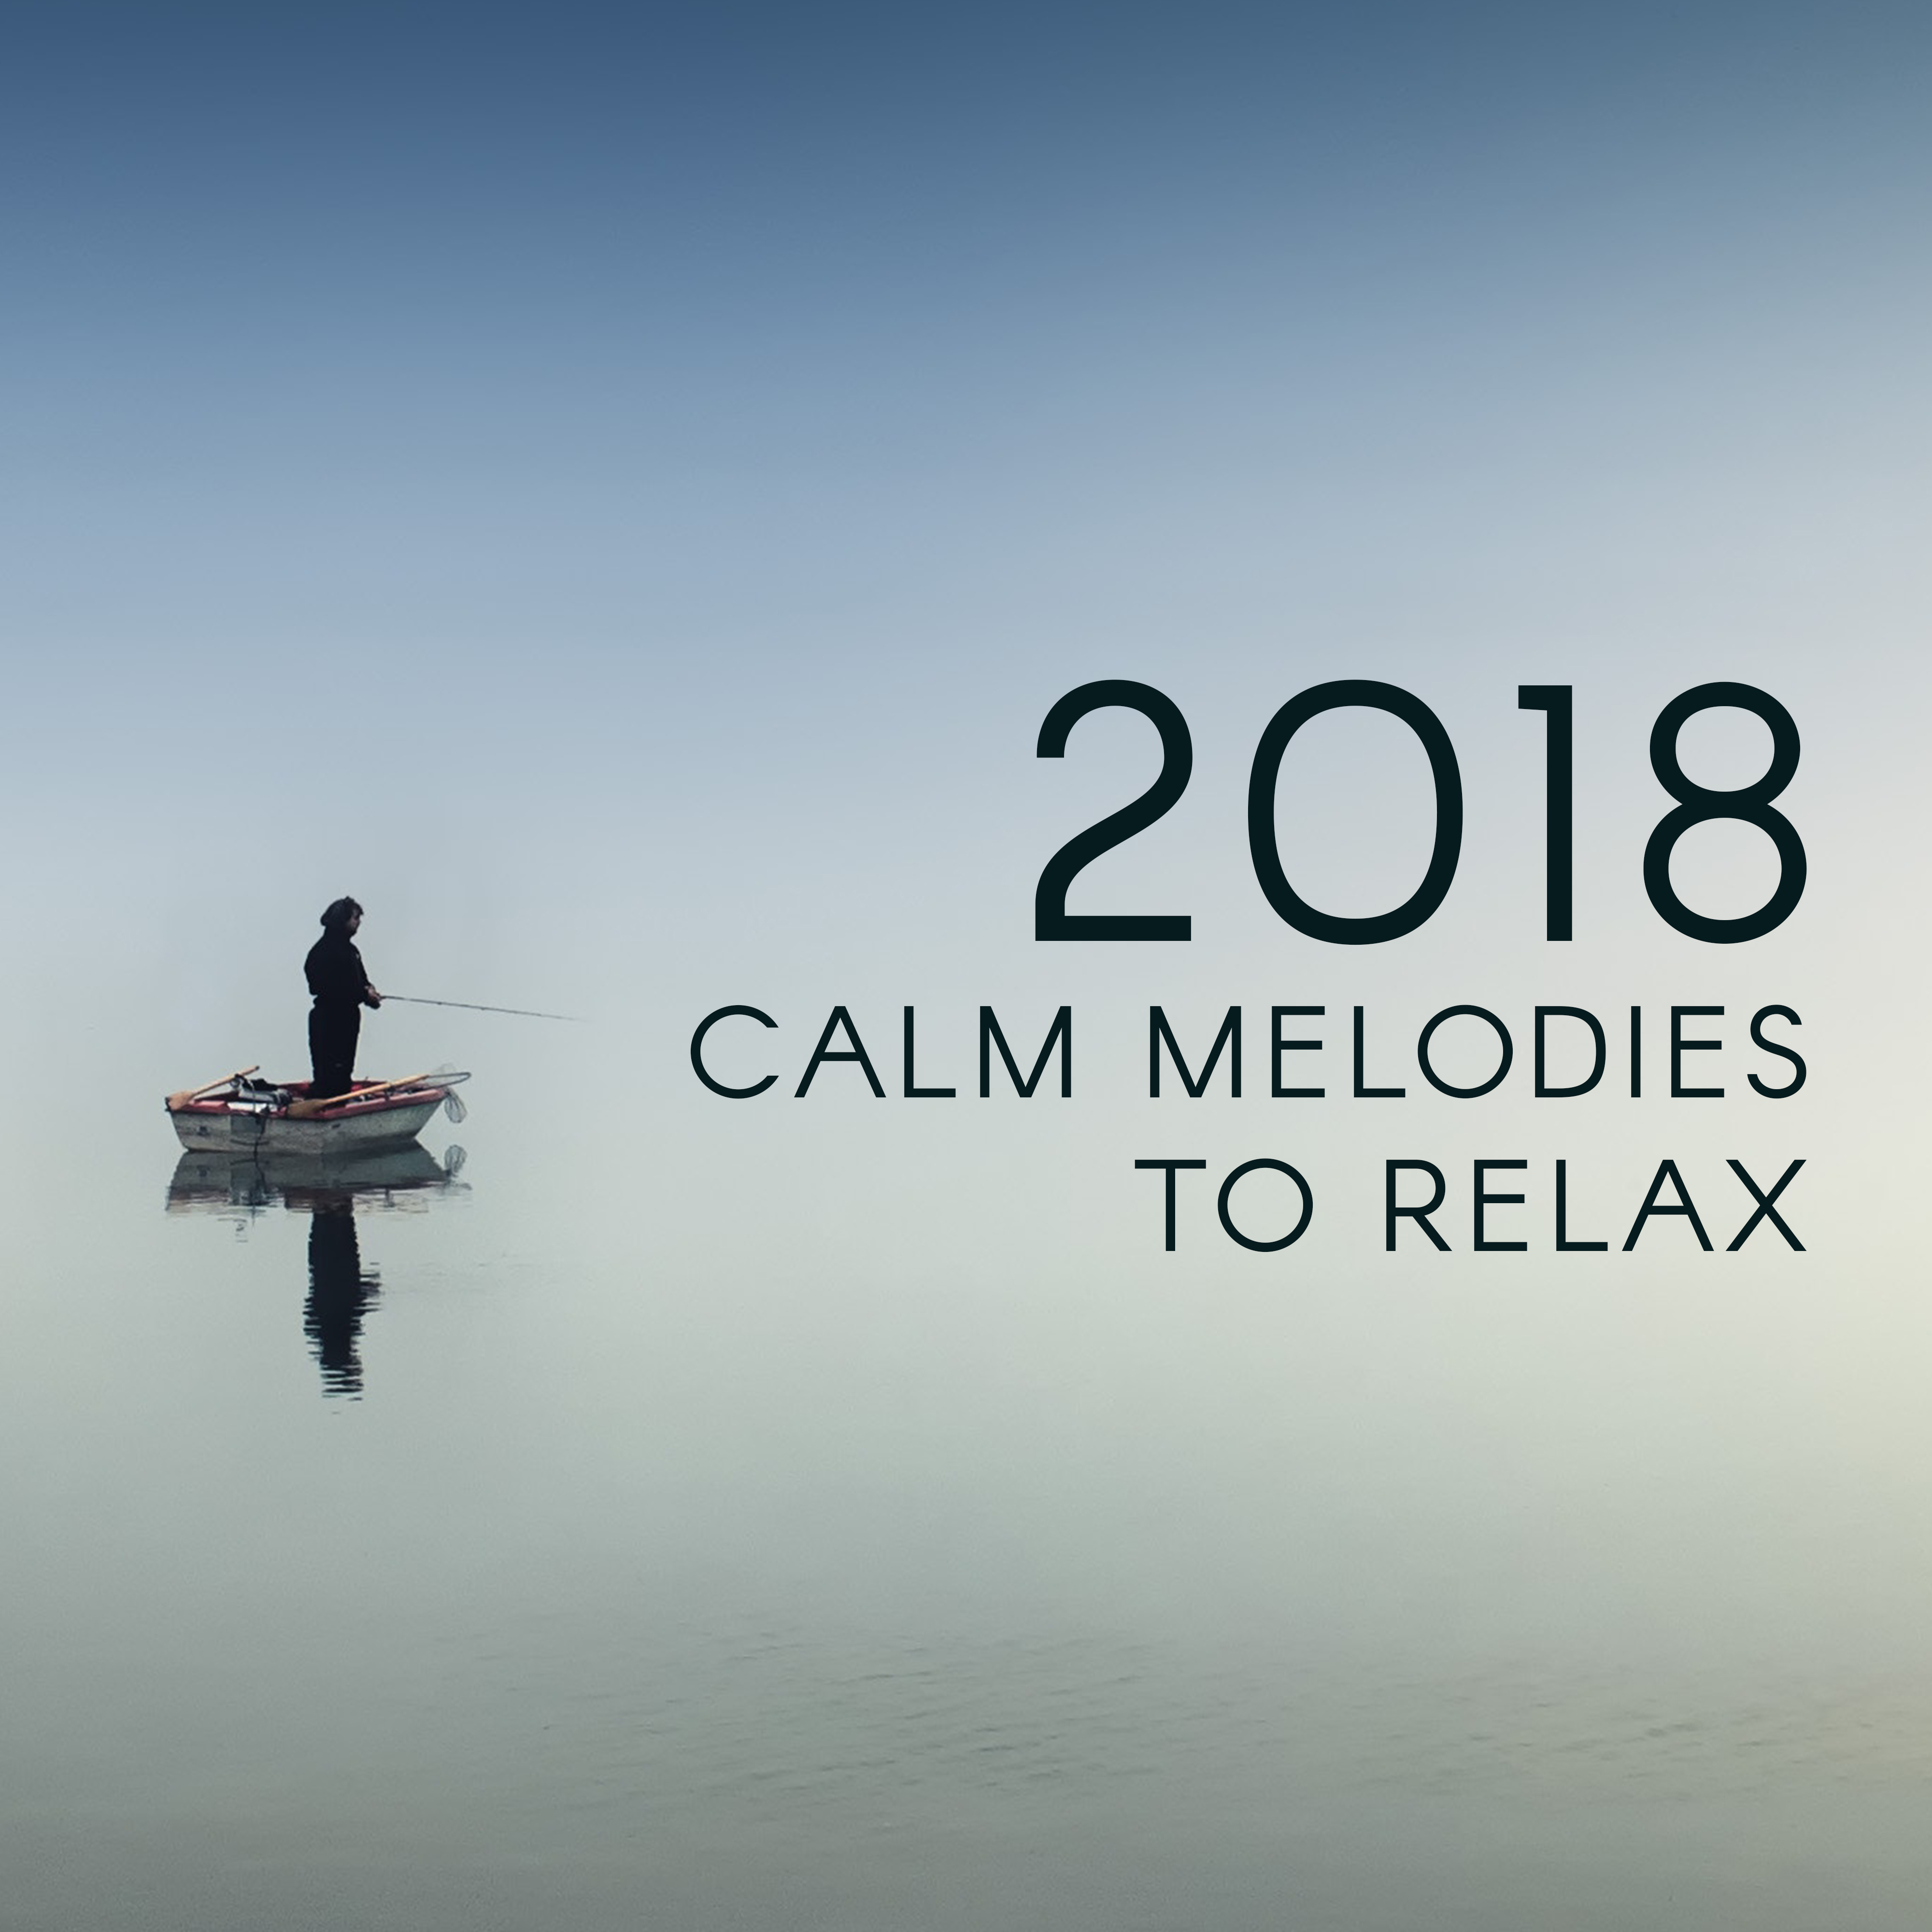 2018 Calm Melodies to Relax